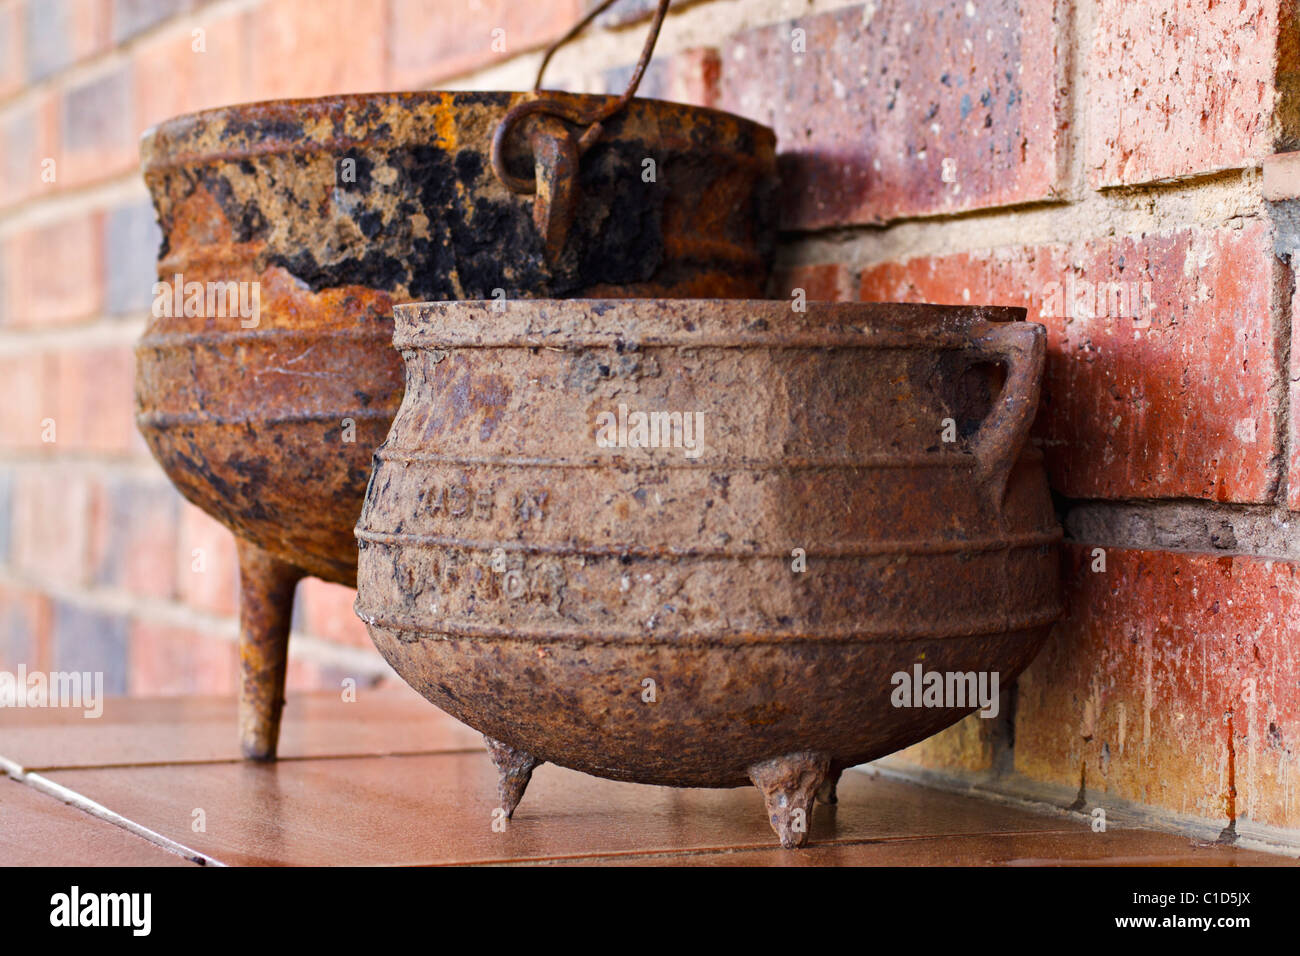 Traditional cast iron three-legged cooking pots from South Africa called phutu by indigenous tribes and potjie by Afrikaners. Stock Photo